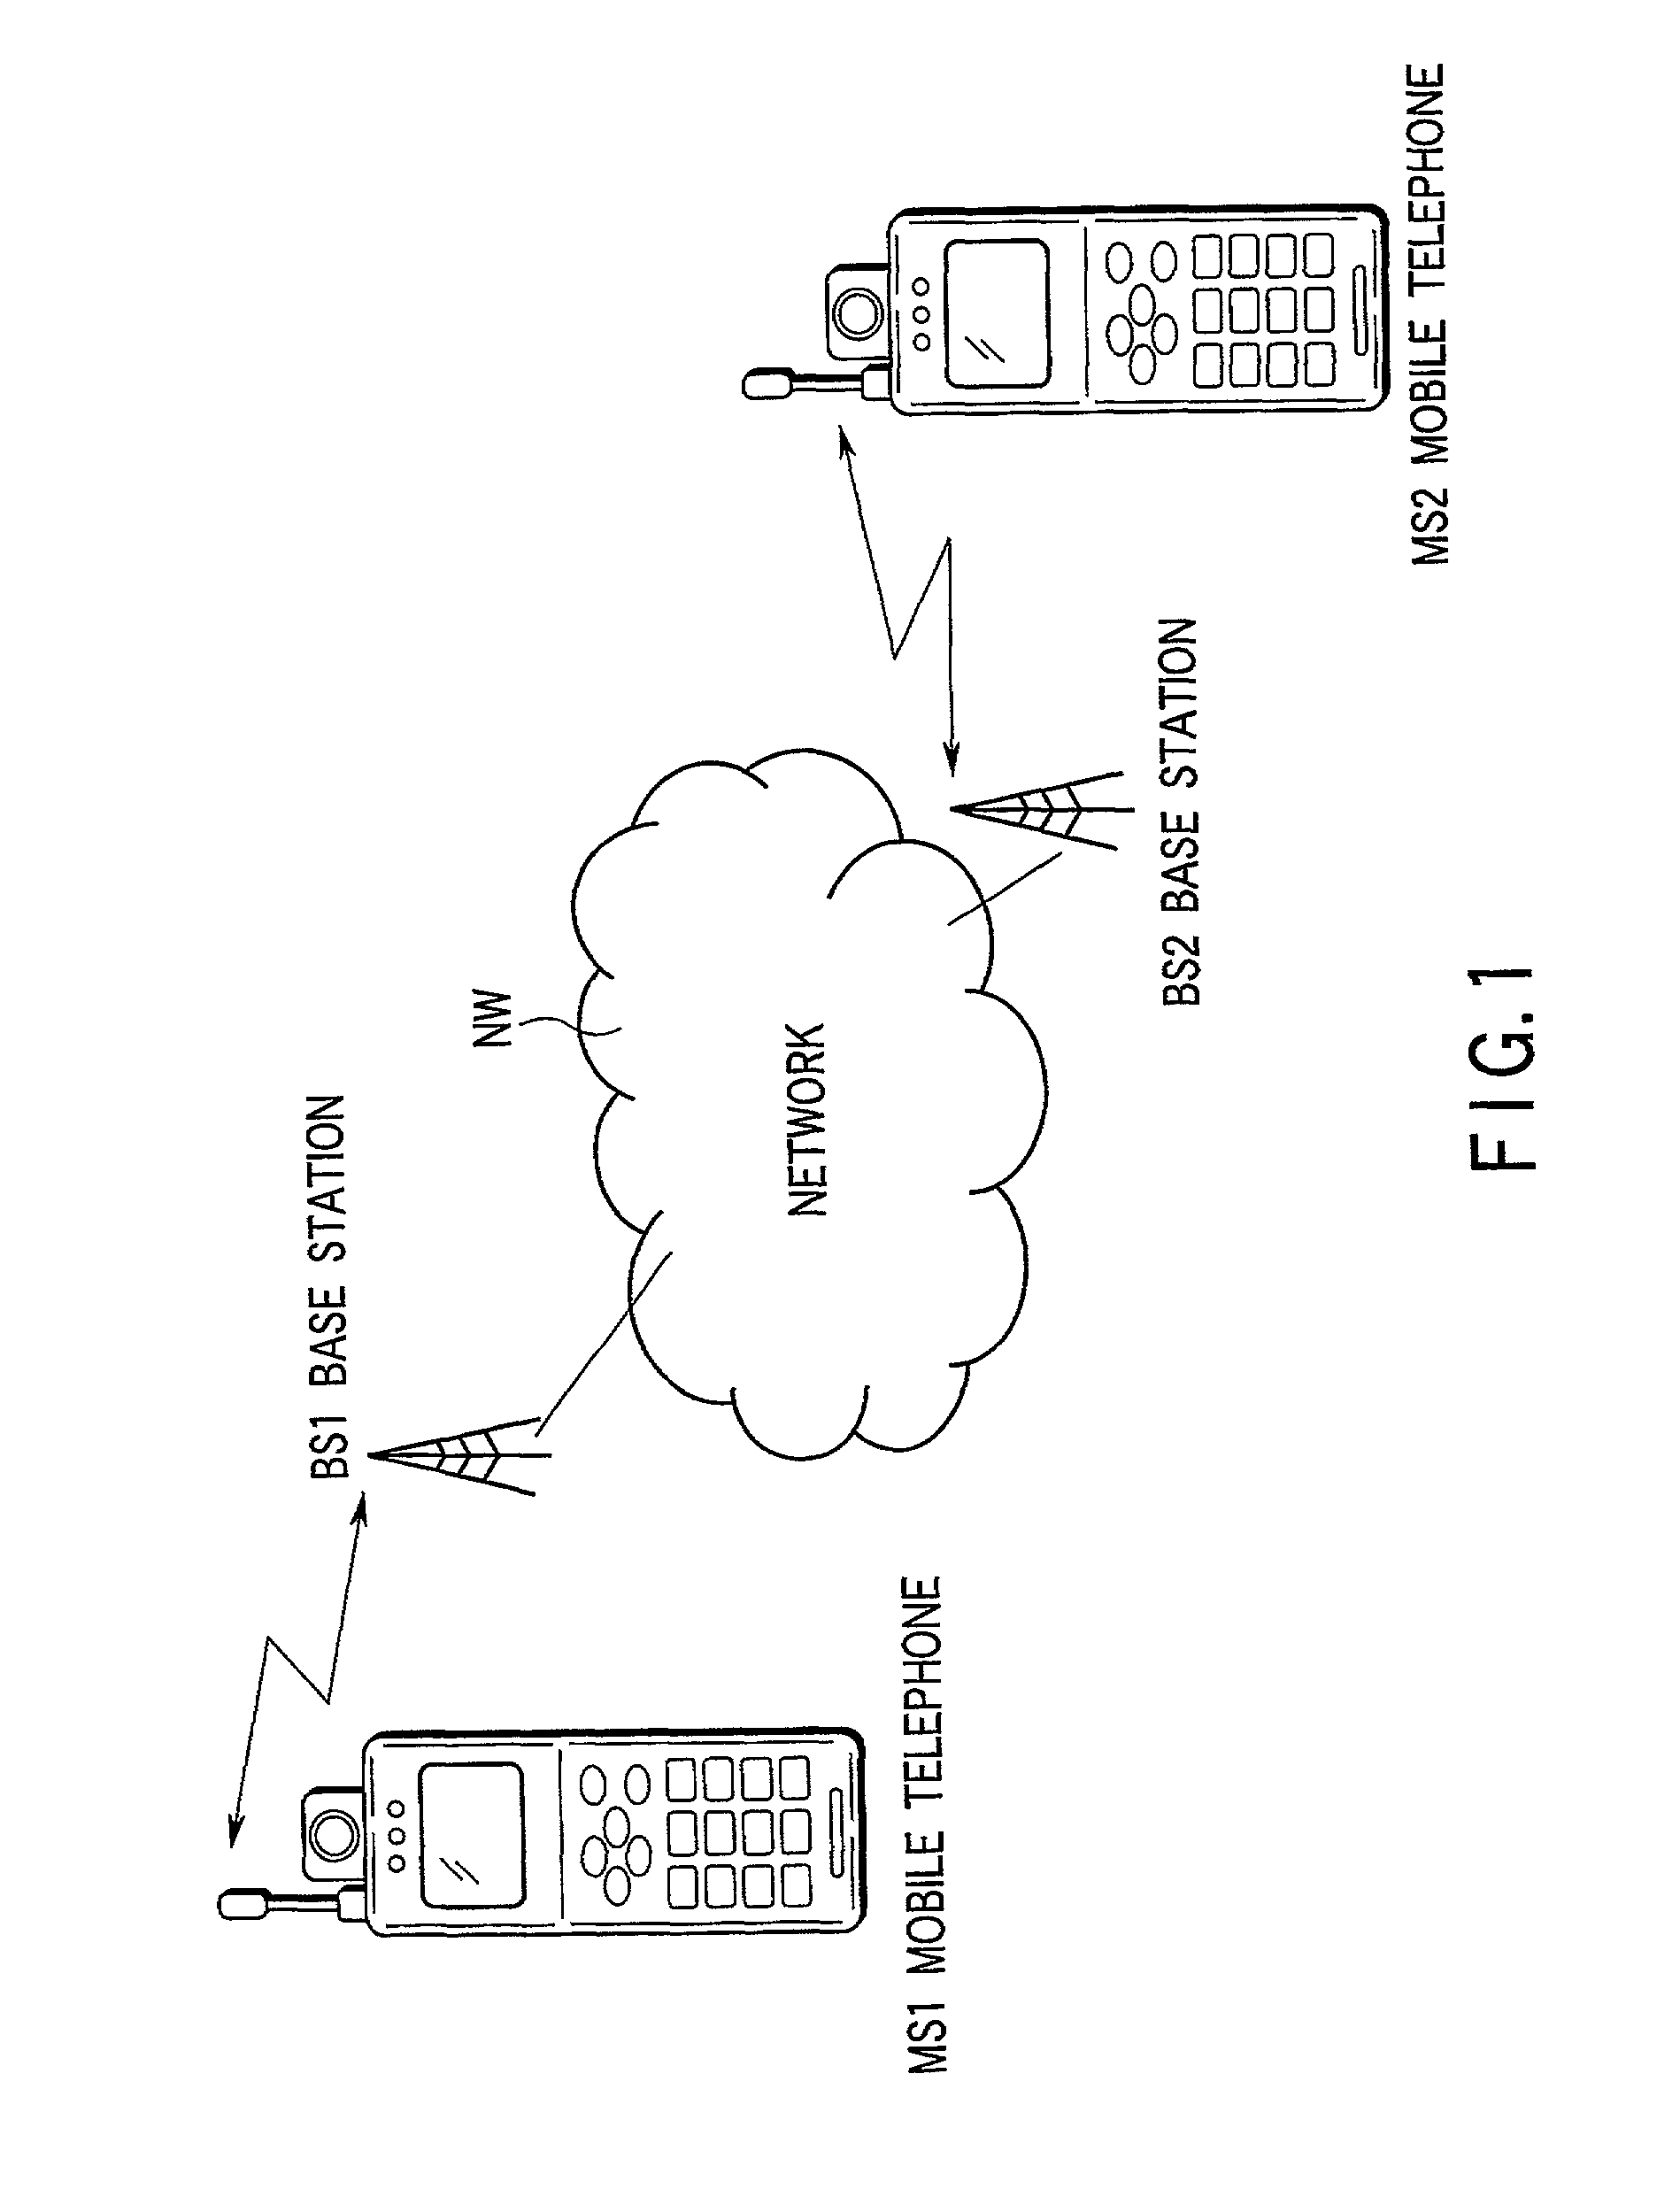 Communication device which requests transmission of encoded data based on monitored reception quality